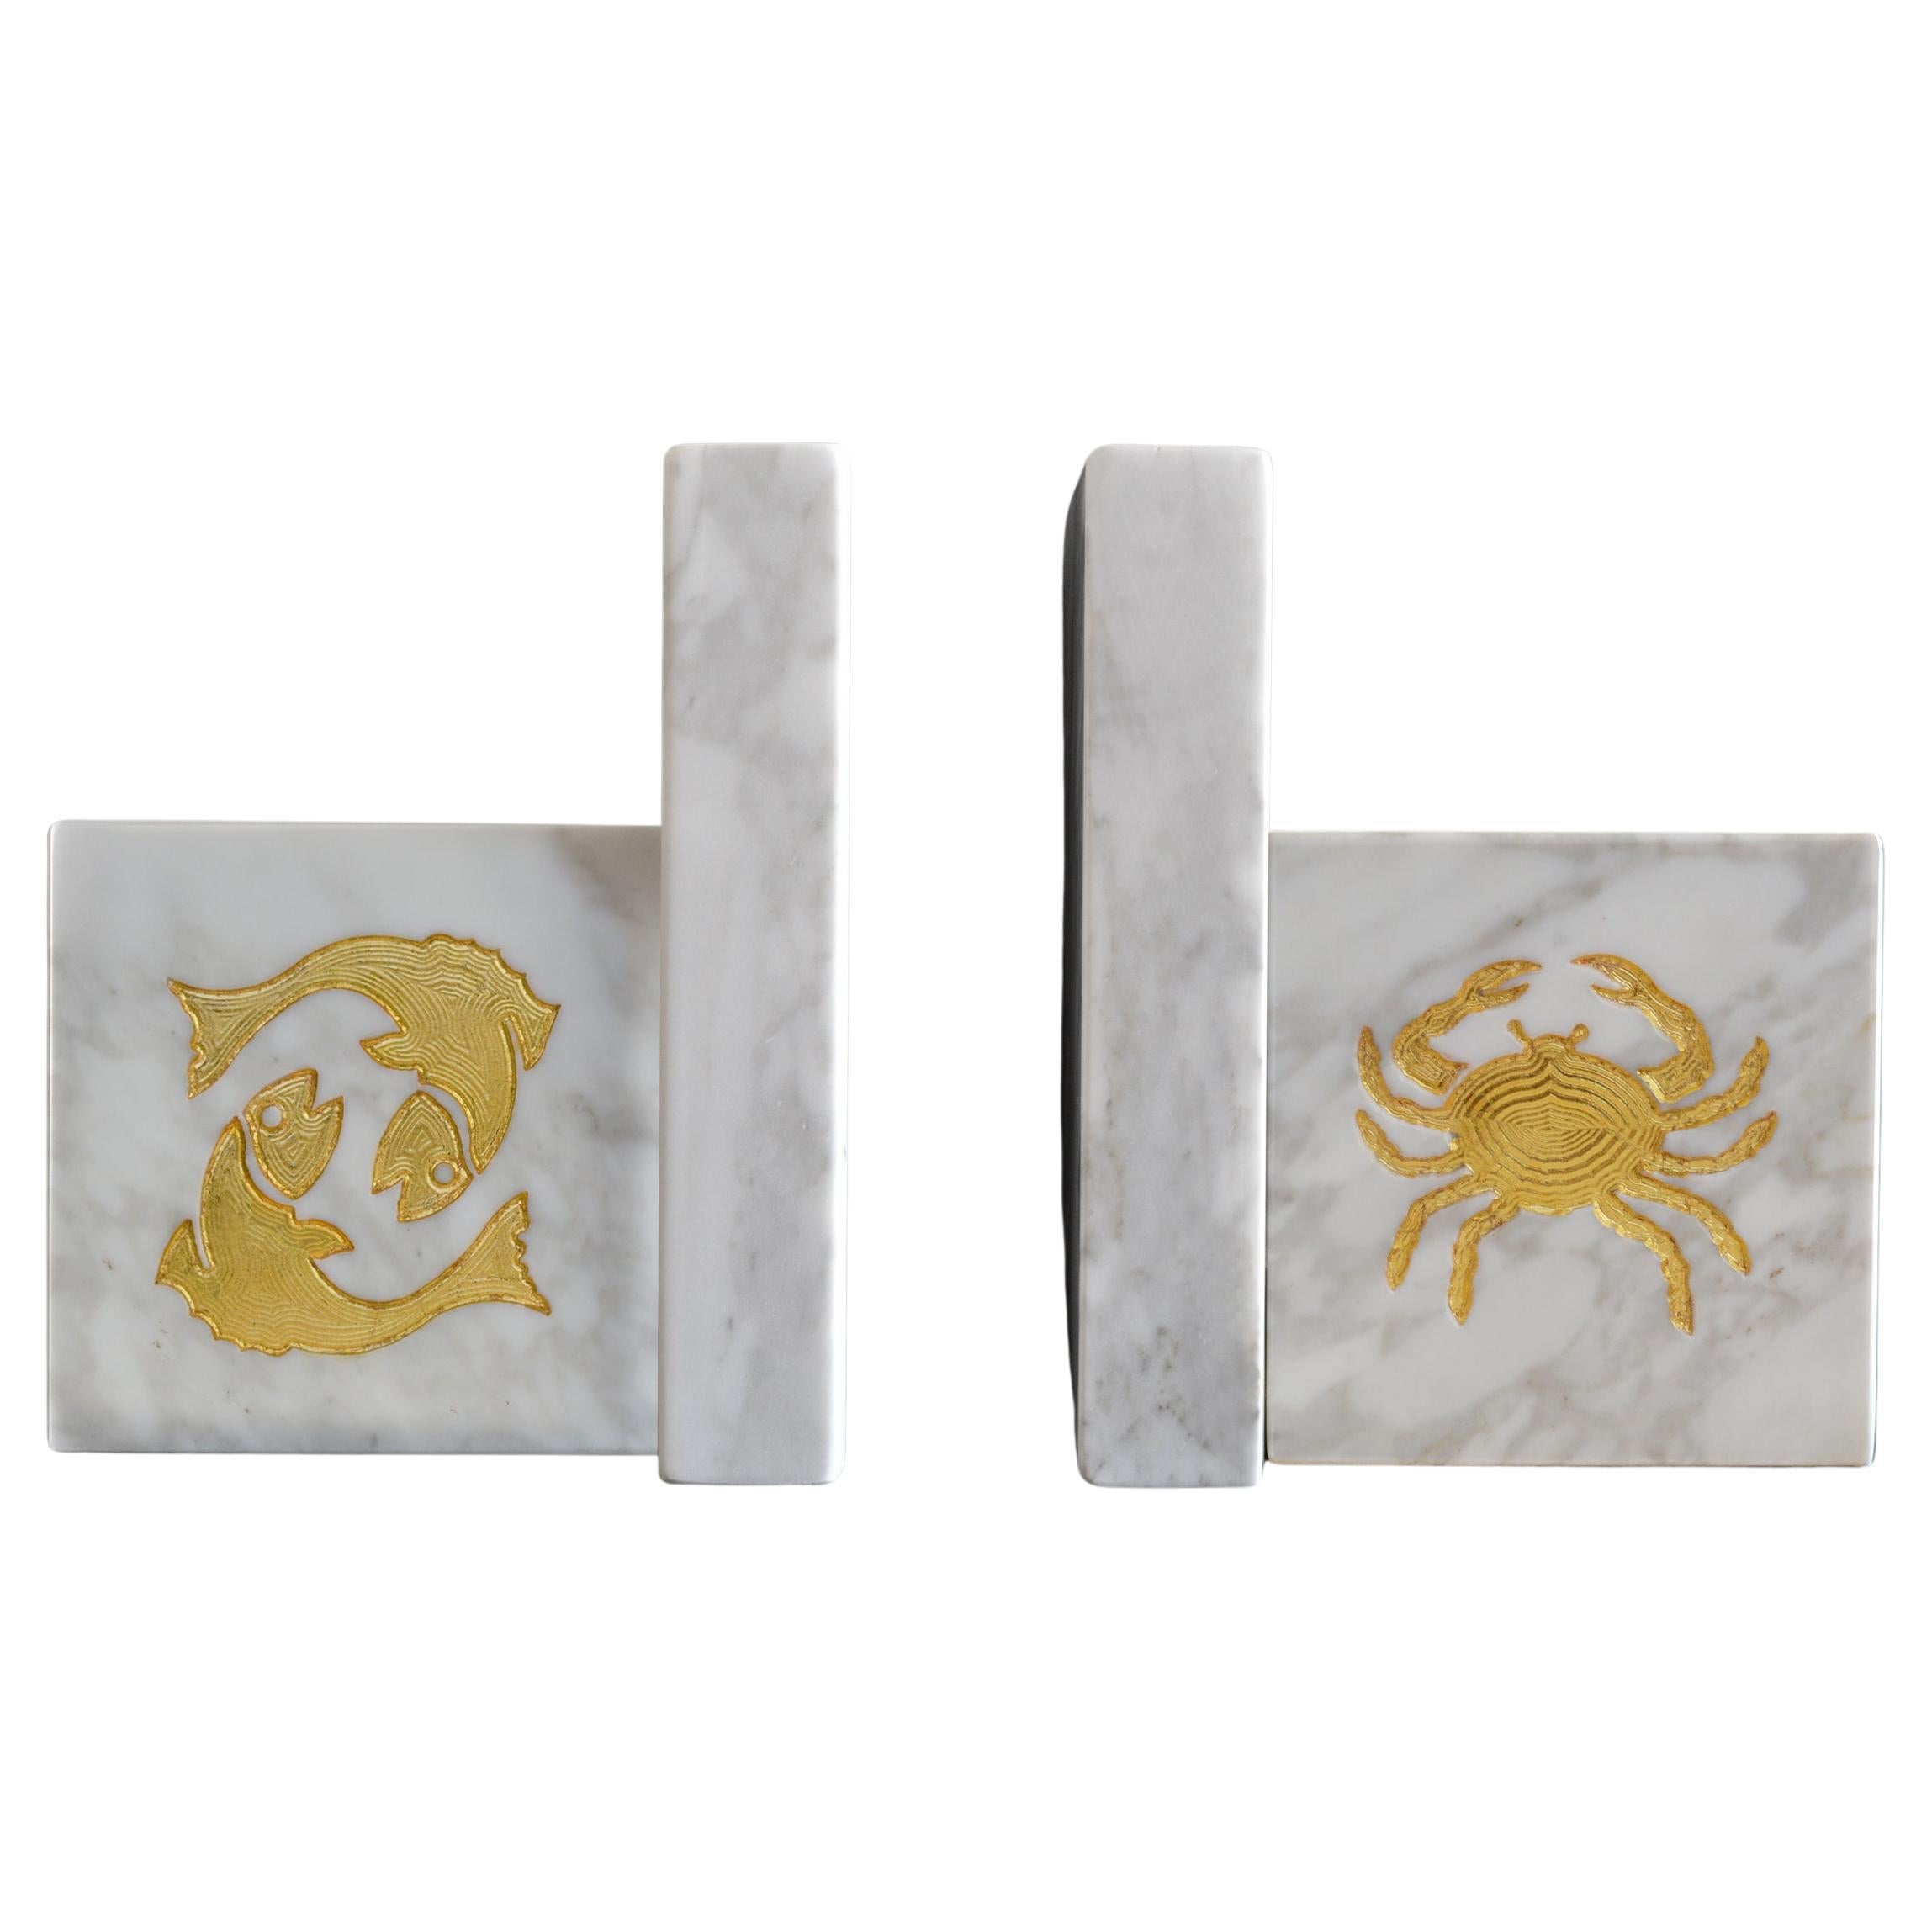 Cupioli White Marble Bookends  gold leaf  Inlaid Zodiac  Handmade in Italy   For Sale